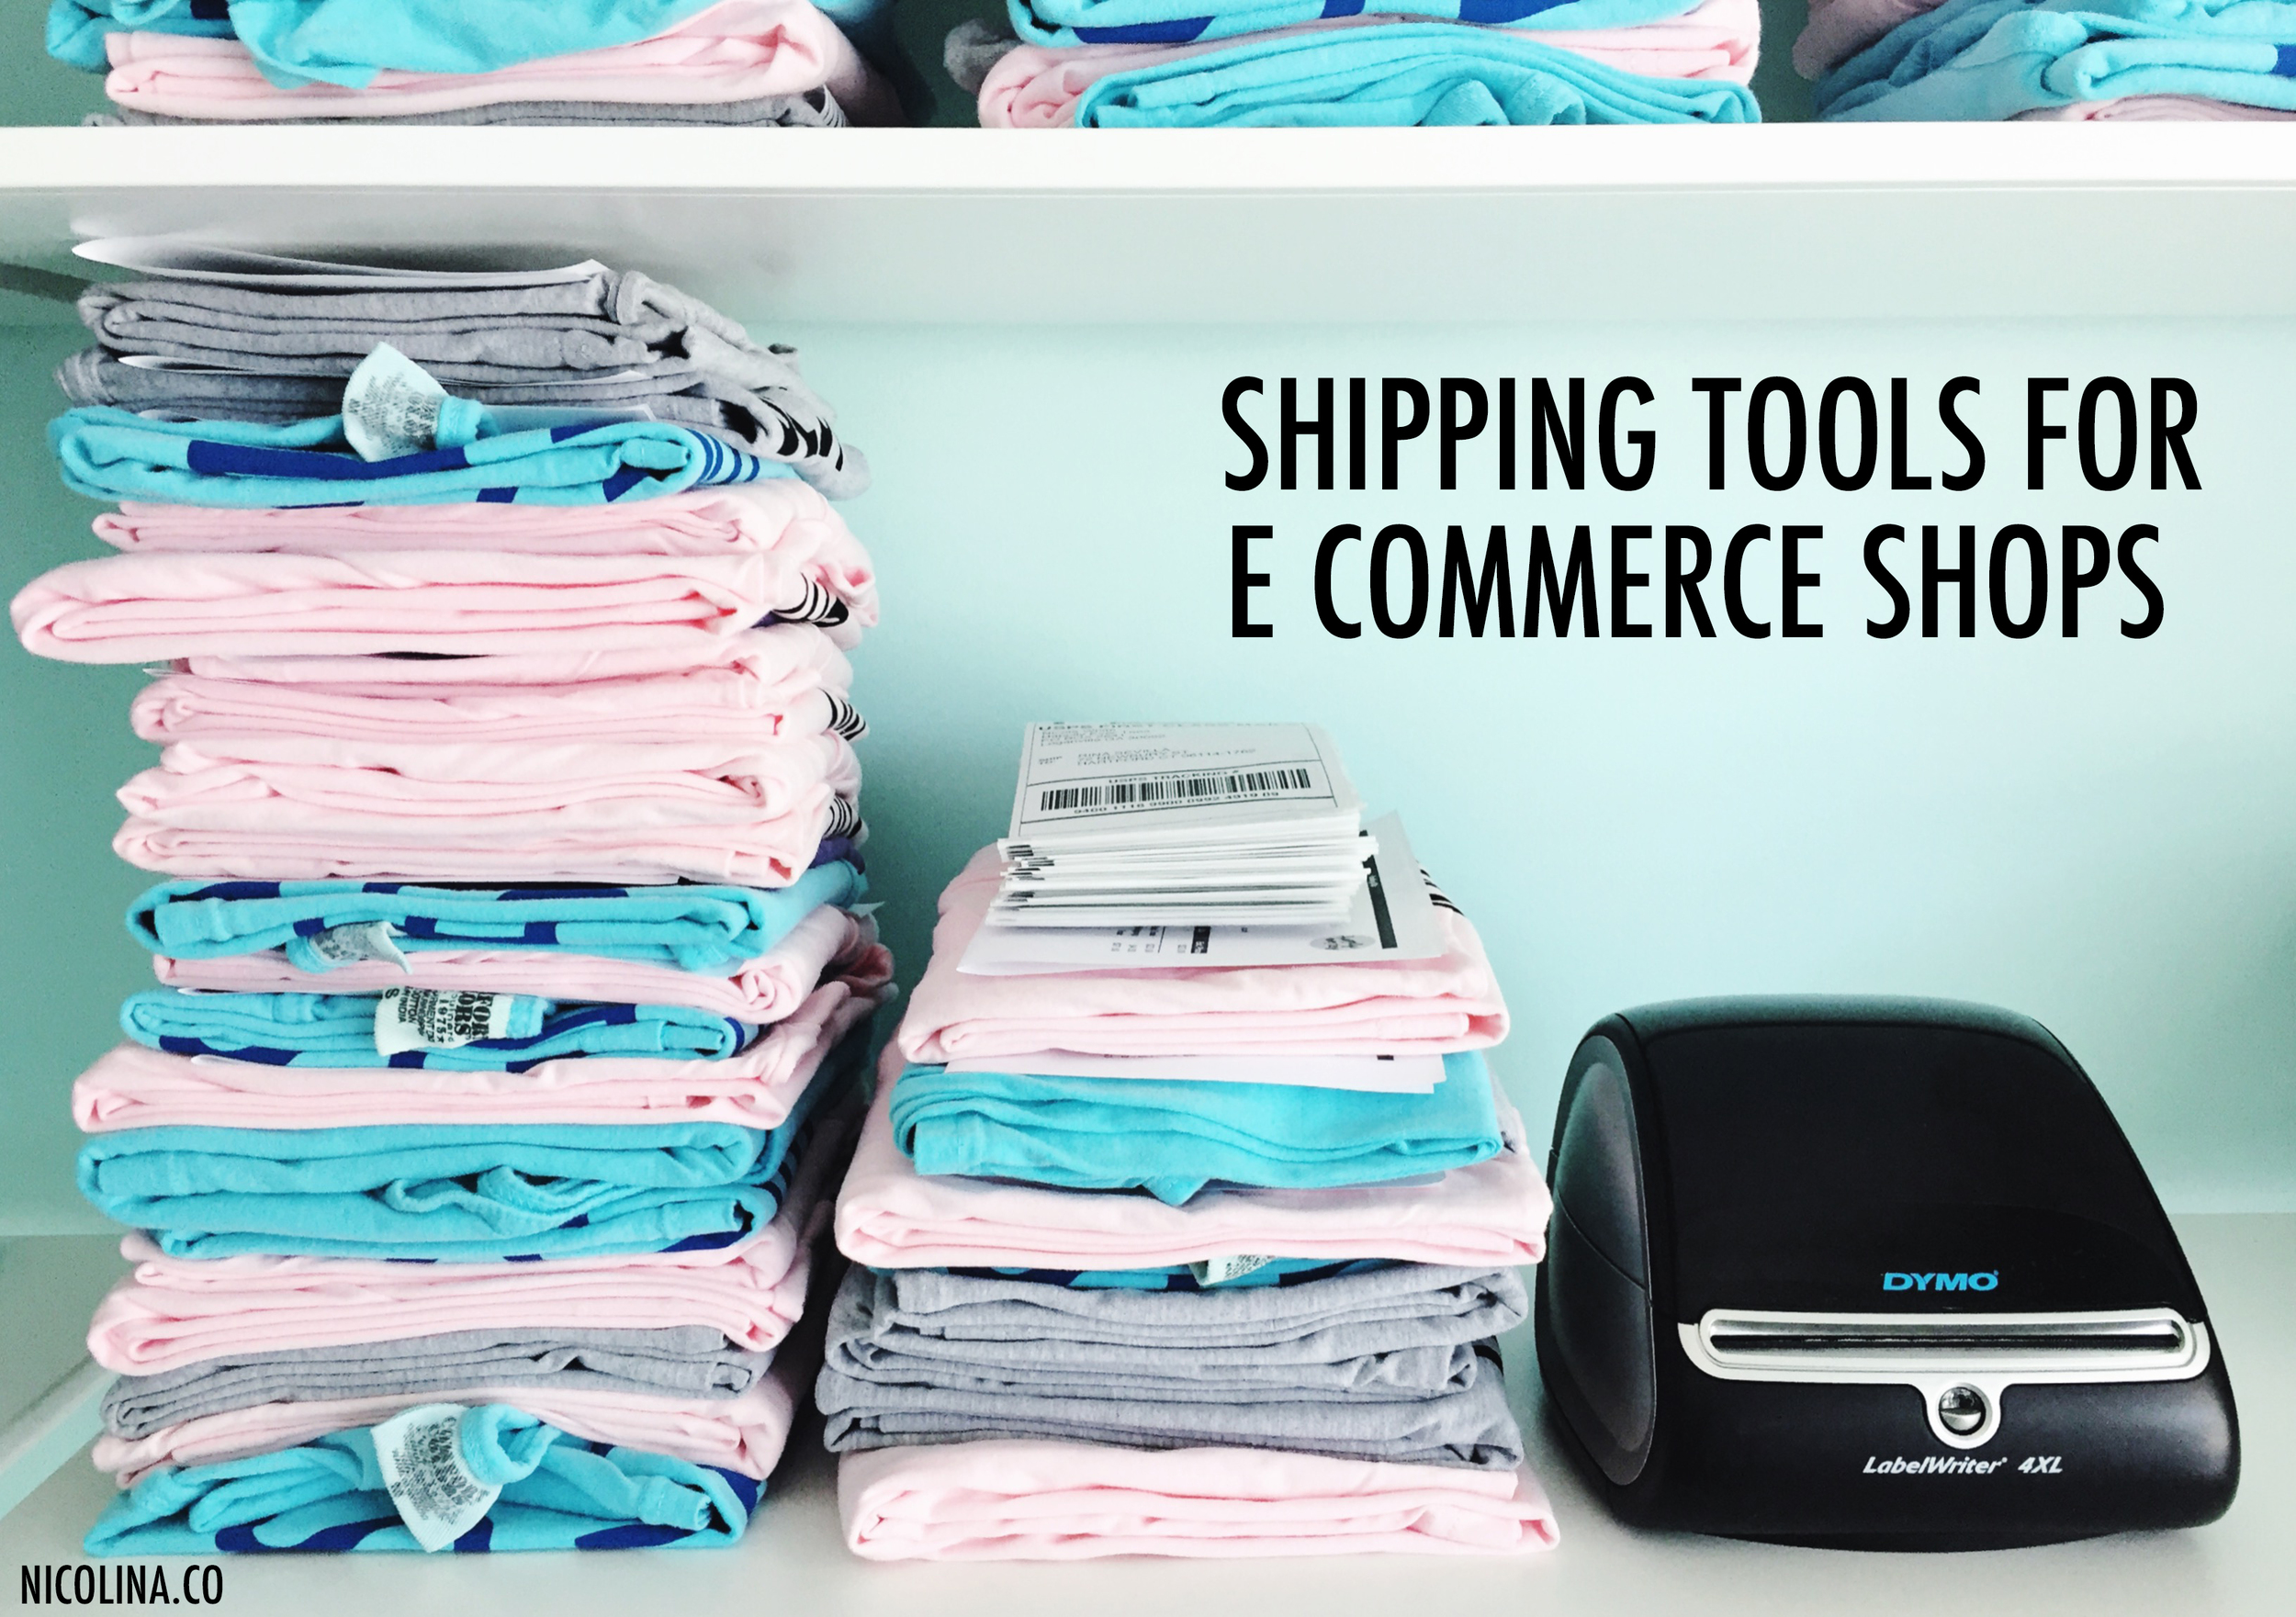 Shipping Tools for E Commerce Shops